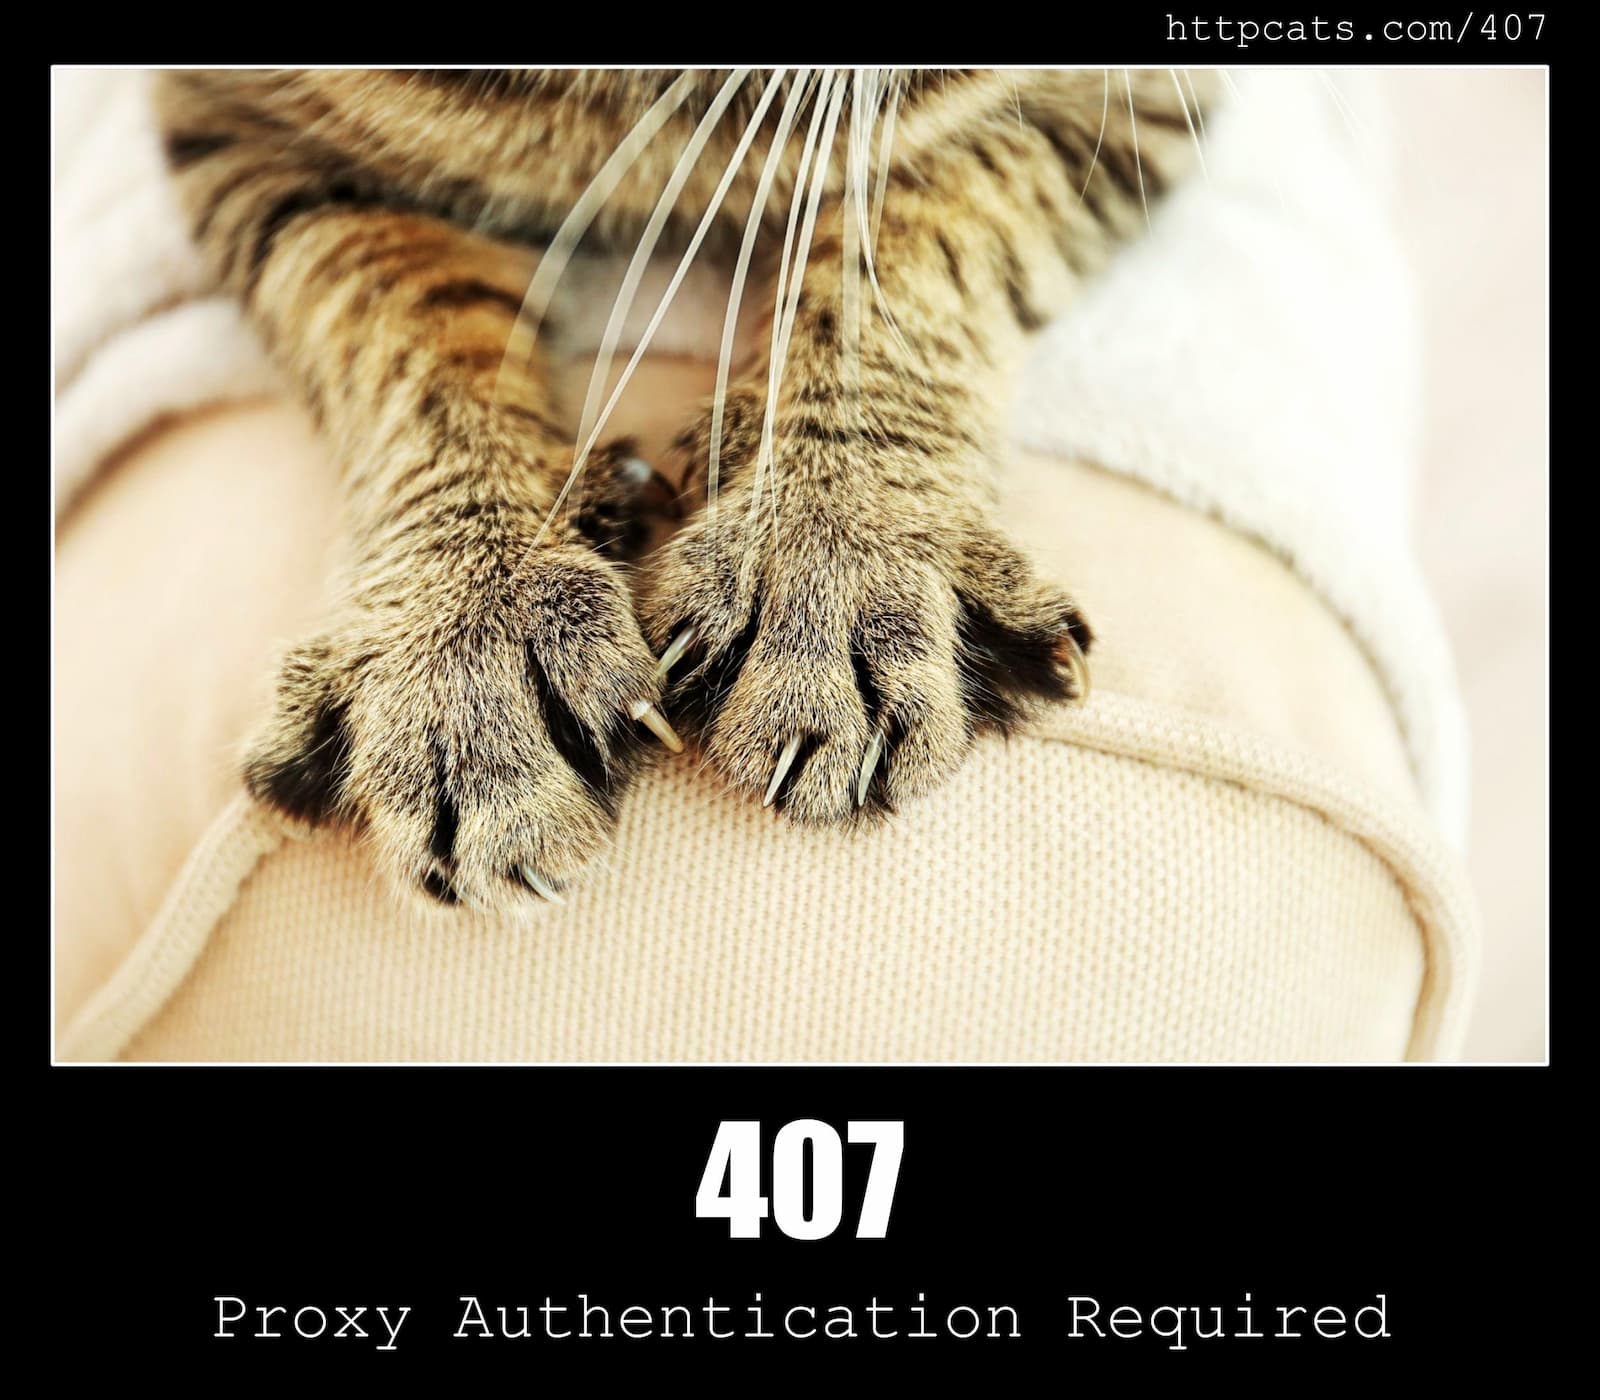 HTTP Status Code 407 Proxy Authentication Required & Cats